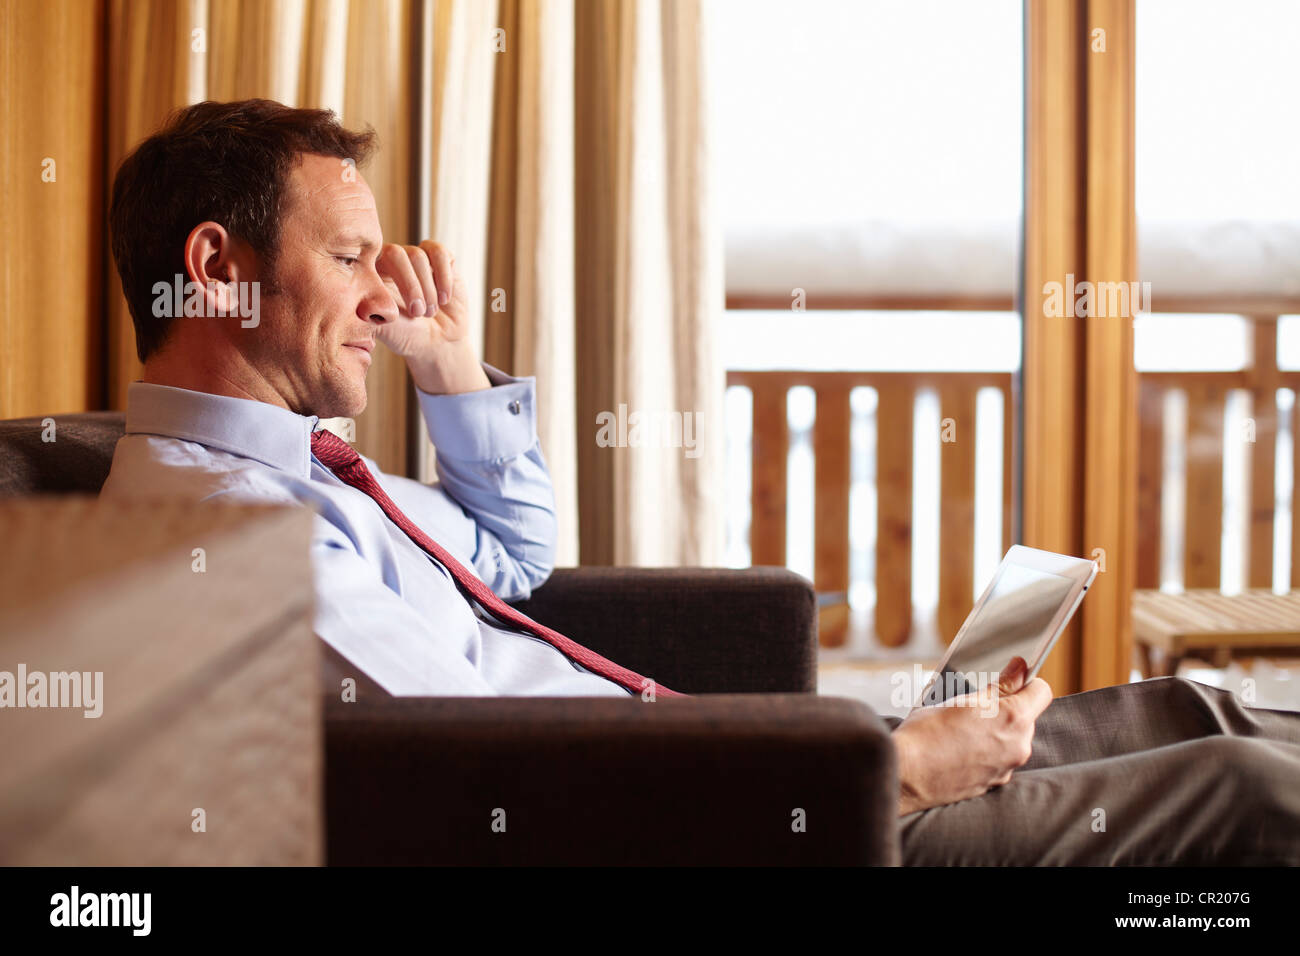 Businesswoman using tablet in hotel room Stock Photo